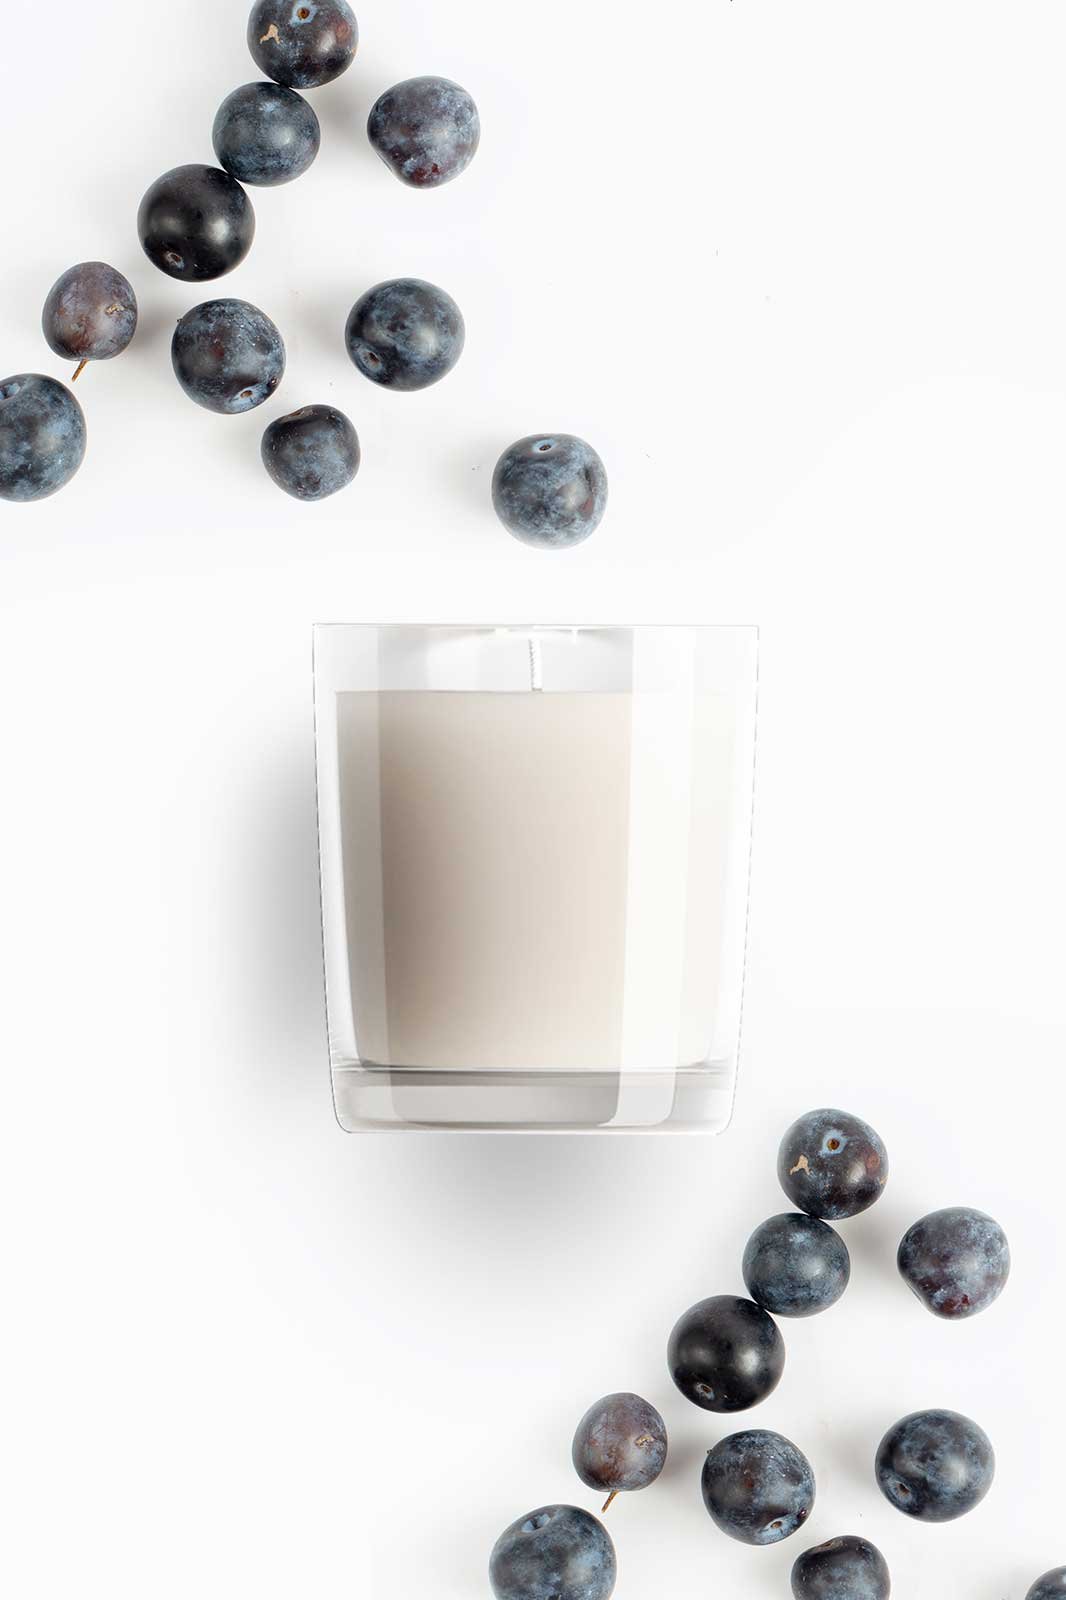 Blueberry Candle, blueberry glass candle, Blueberry scented candle, blueberry basil candle, blueberry breeze candle, blueberry candle cheap, blueberry candle near me, blueberry candle scent, blueberry decor candle, blueberry dessert candle, Blueberry vanilla candle, House of Aroma, scented candles online, home decor scented candles, organic scented candles, online scented candles, home decor candle, buy scented candles online, room decor candles, best scented candles online, organic candles India, aroma candles online India, organic scents for candles, organic soy candles, natural scented beeswax candles, benefits scented candles, aroma candles buy online, scented candles for home decor, best scents of candles, organic natural scented candles, home decor aroma candles, scented candles order online, organic soy candle wax, best home scented candles, best organic scented candles, organic scented oils, best fragrance scented candles, organic aroma for candles, organic soy for candles, aroma scented candles, scented candle brand, aroma diffuser candle, essential oil for scented candles, aroma candles gift set, best aroma candles in India